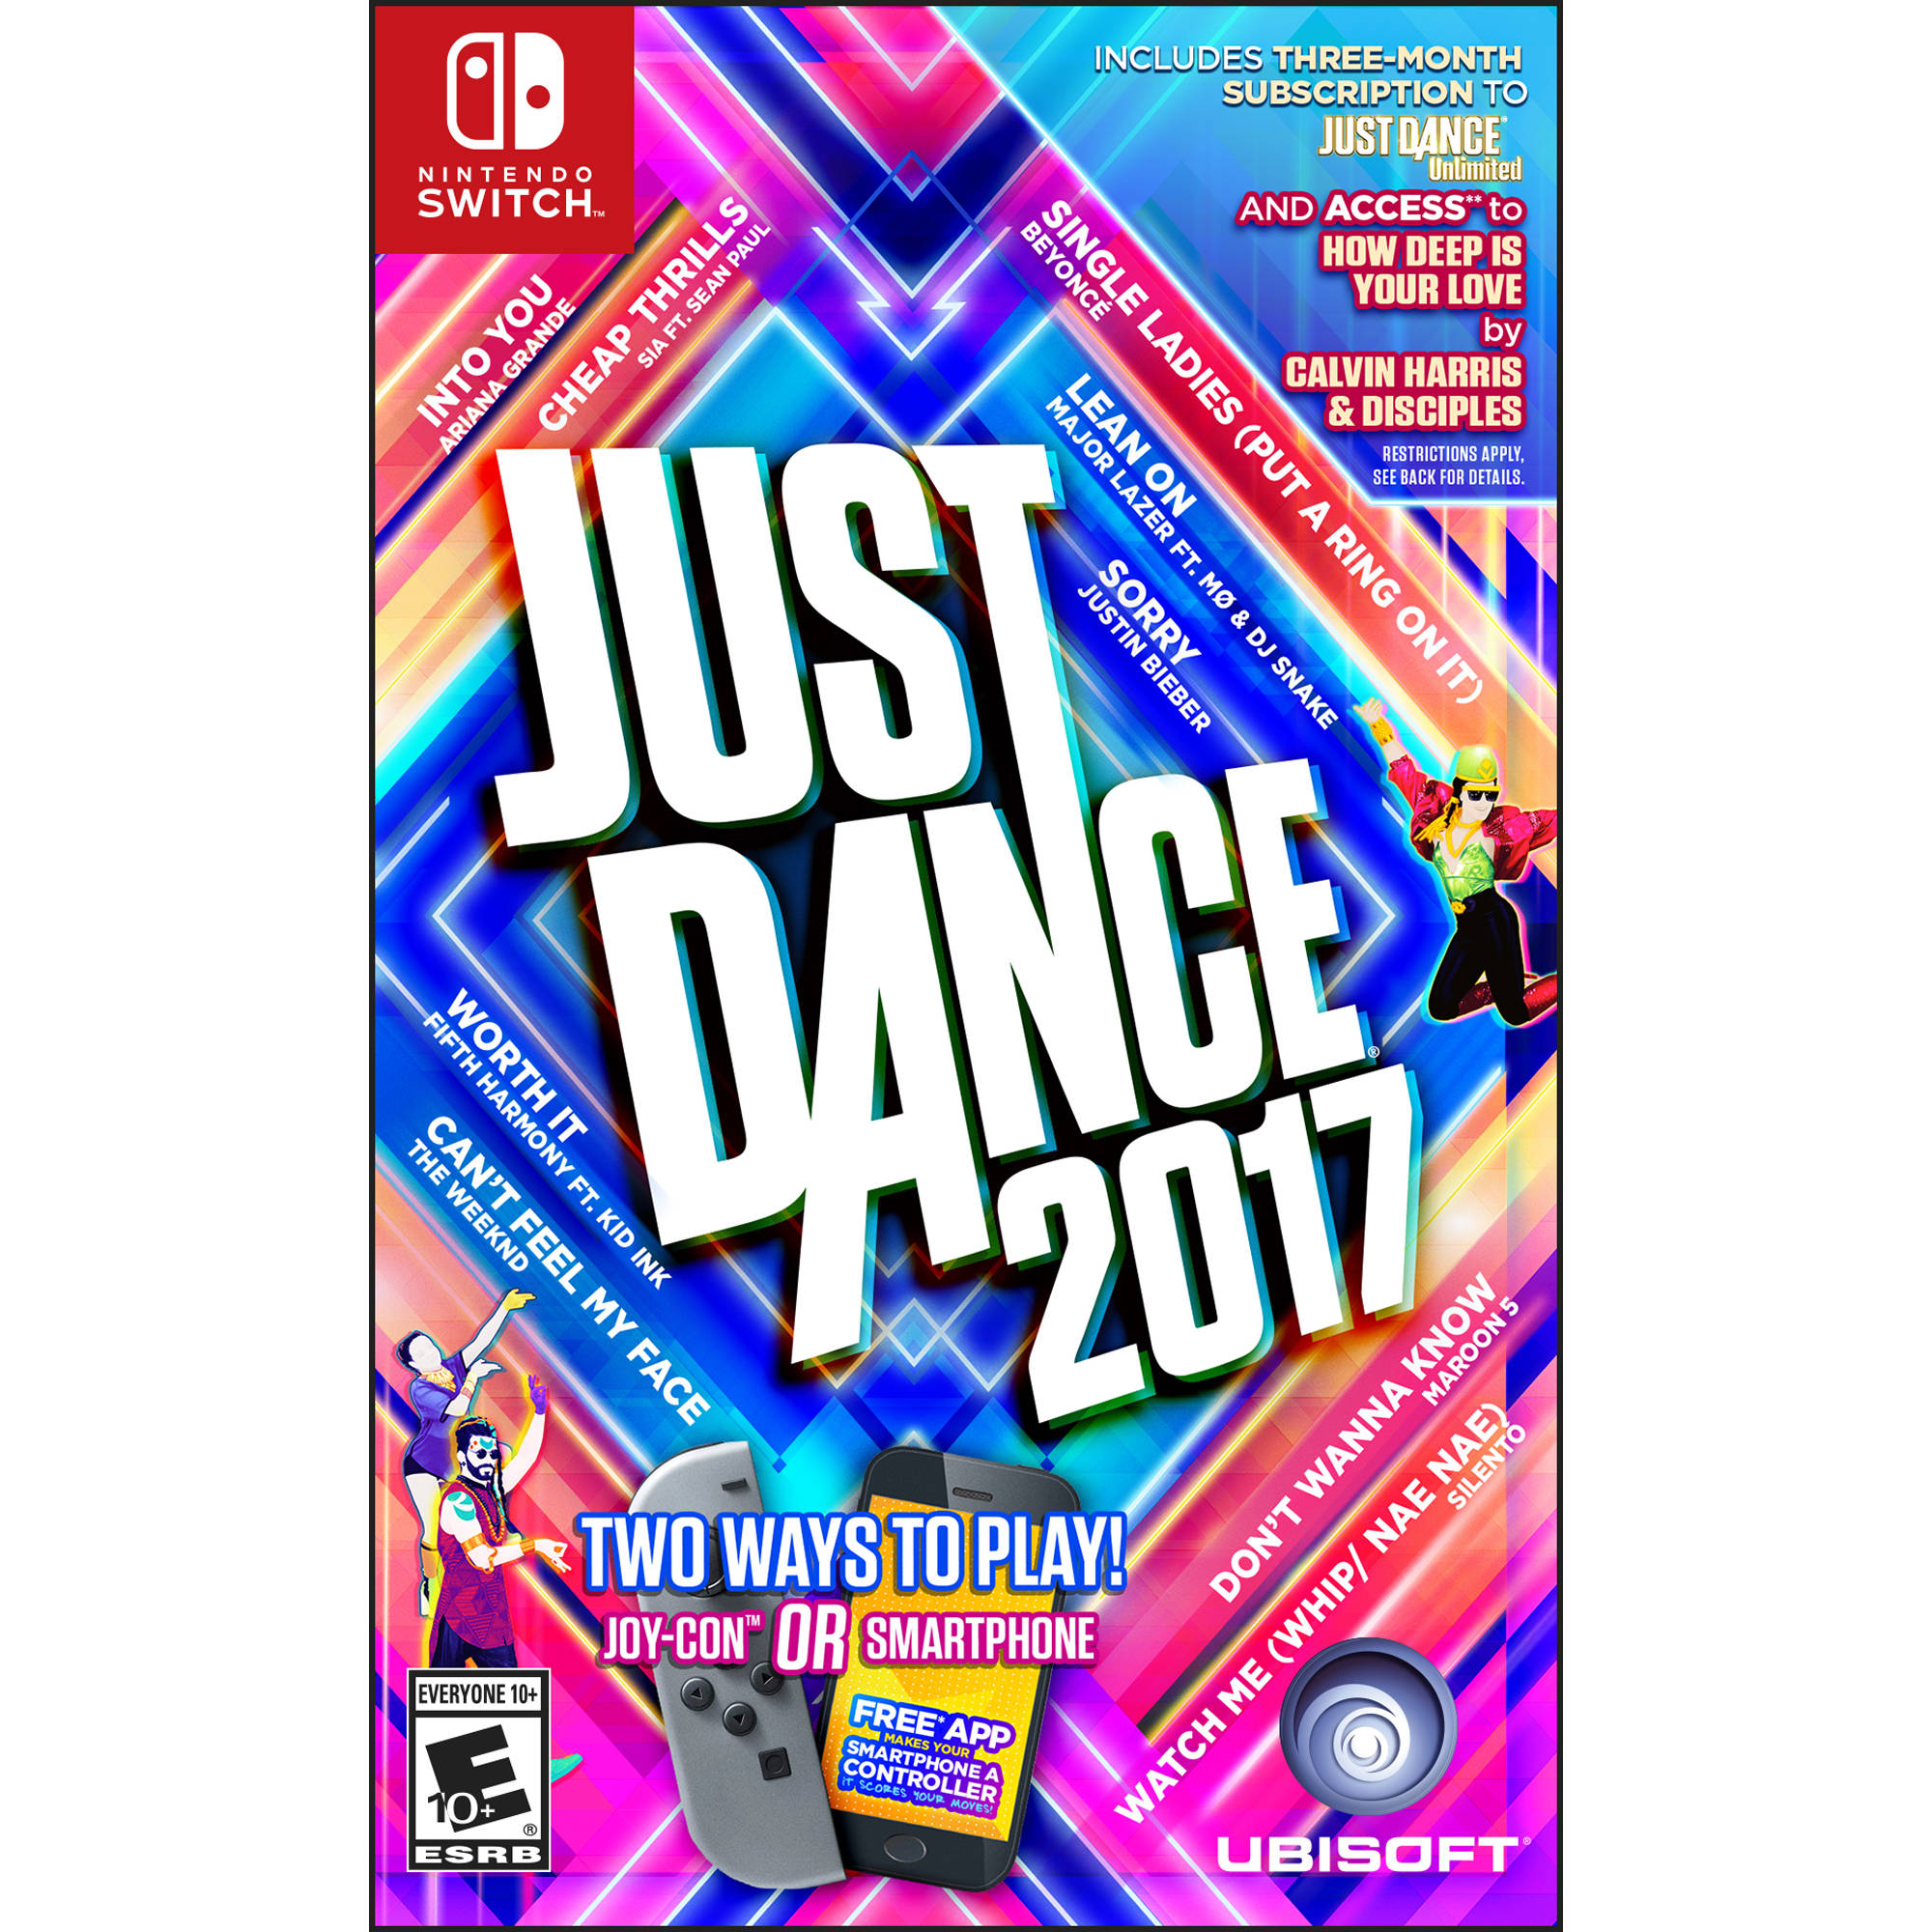 just dance unlimited price nintendo switch